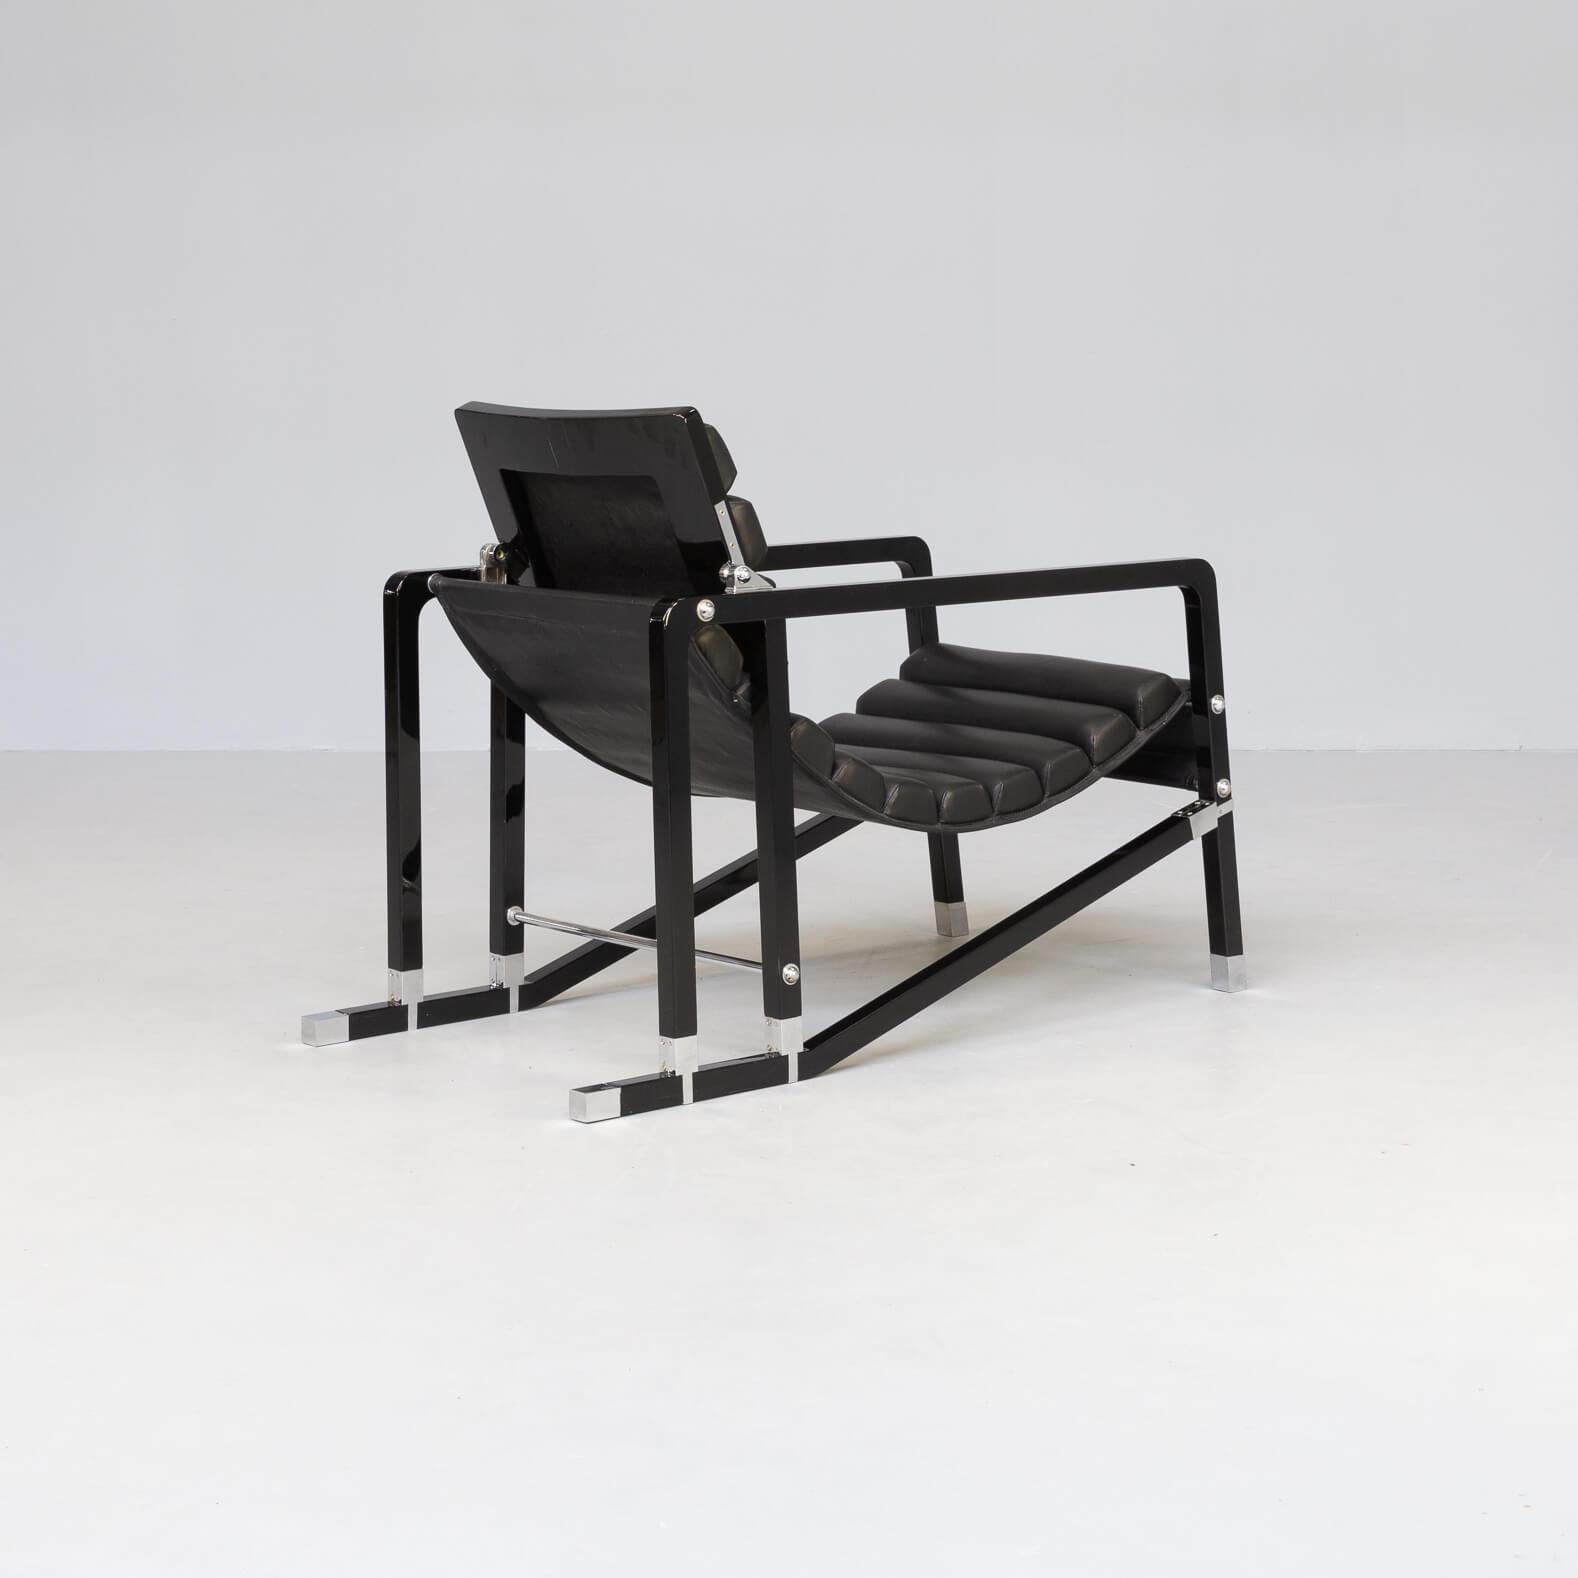 French Eileen Gray Re-Edition Lounge Fauteuil ‘1927 Transat’ by Ecart International For Sale